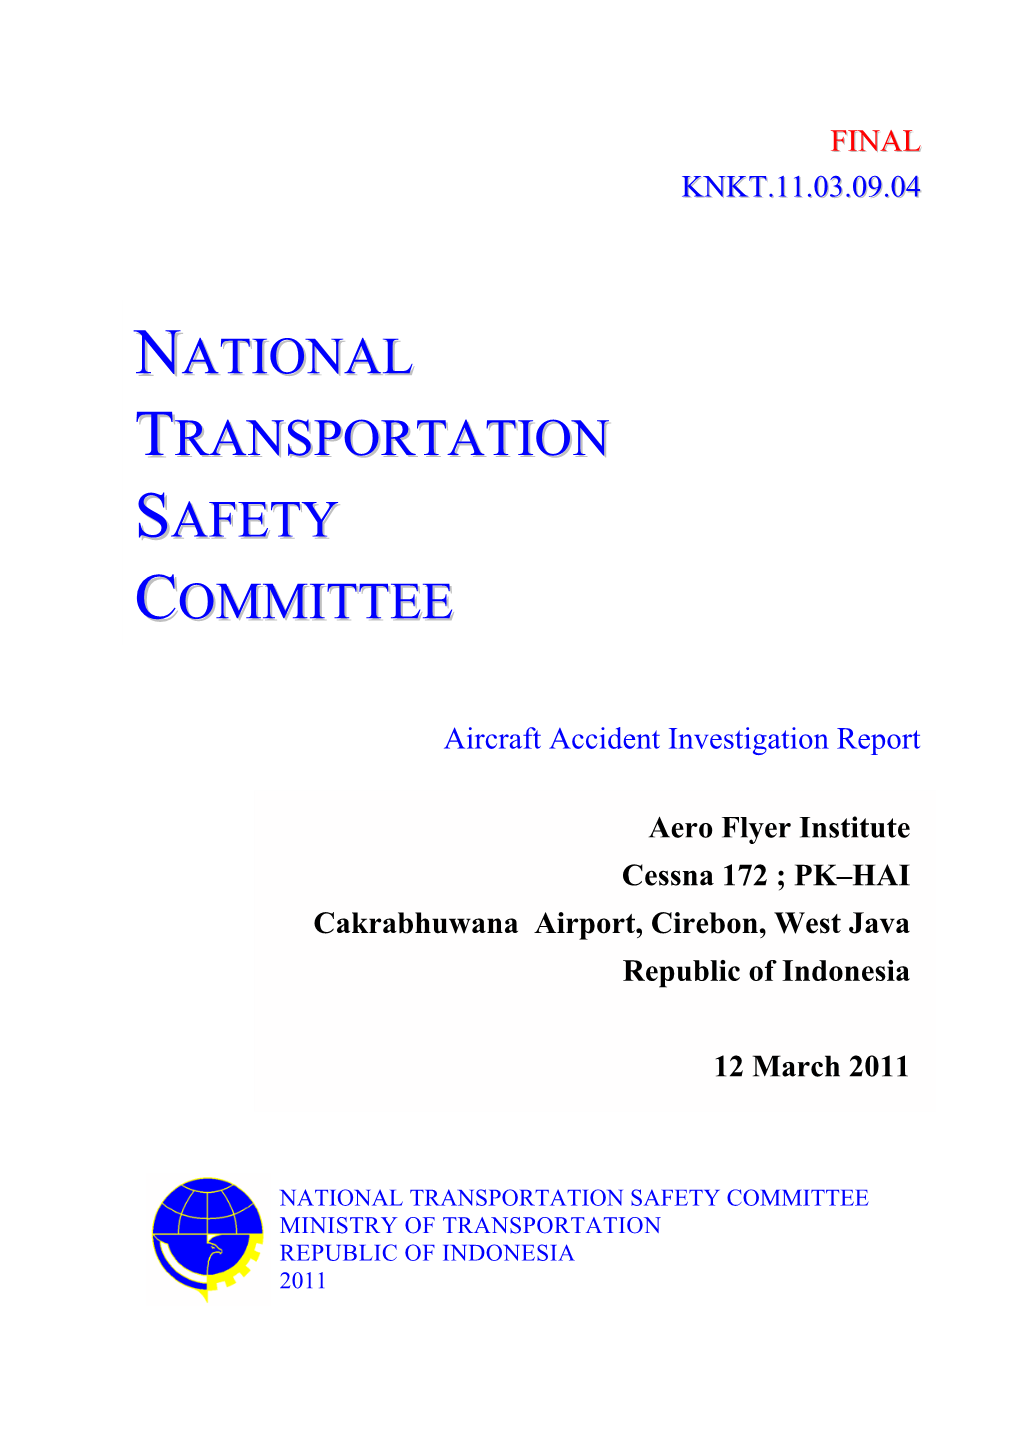 National Transportation Safety Committee Ministry of Transportation Republic of Indonesia 2011